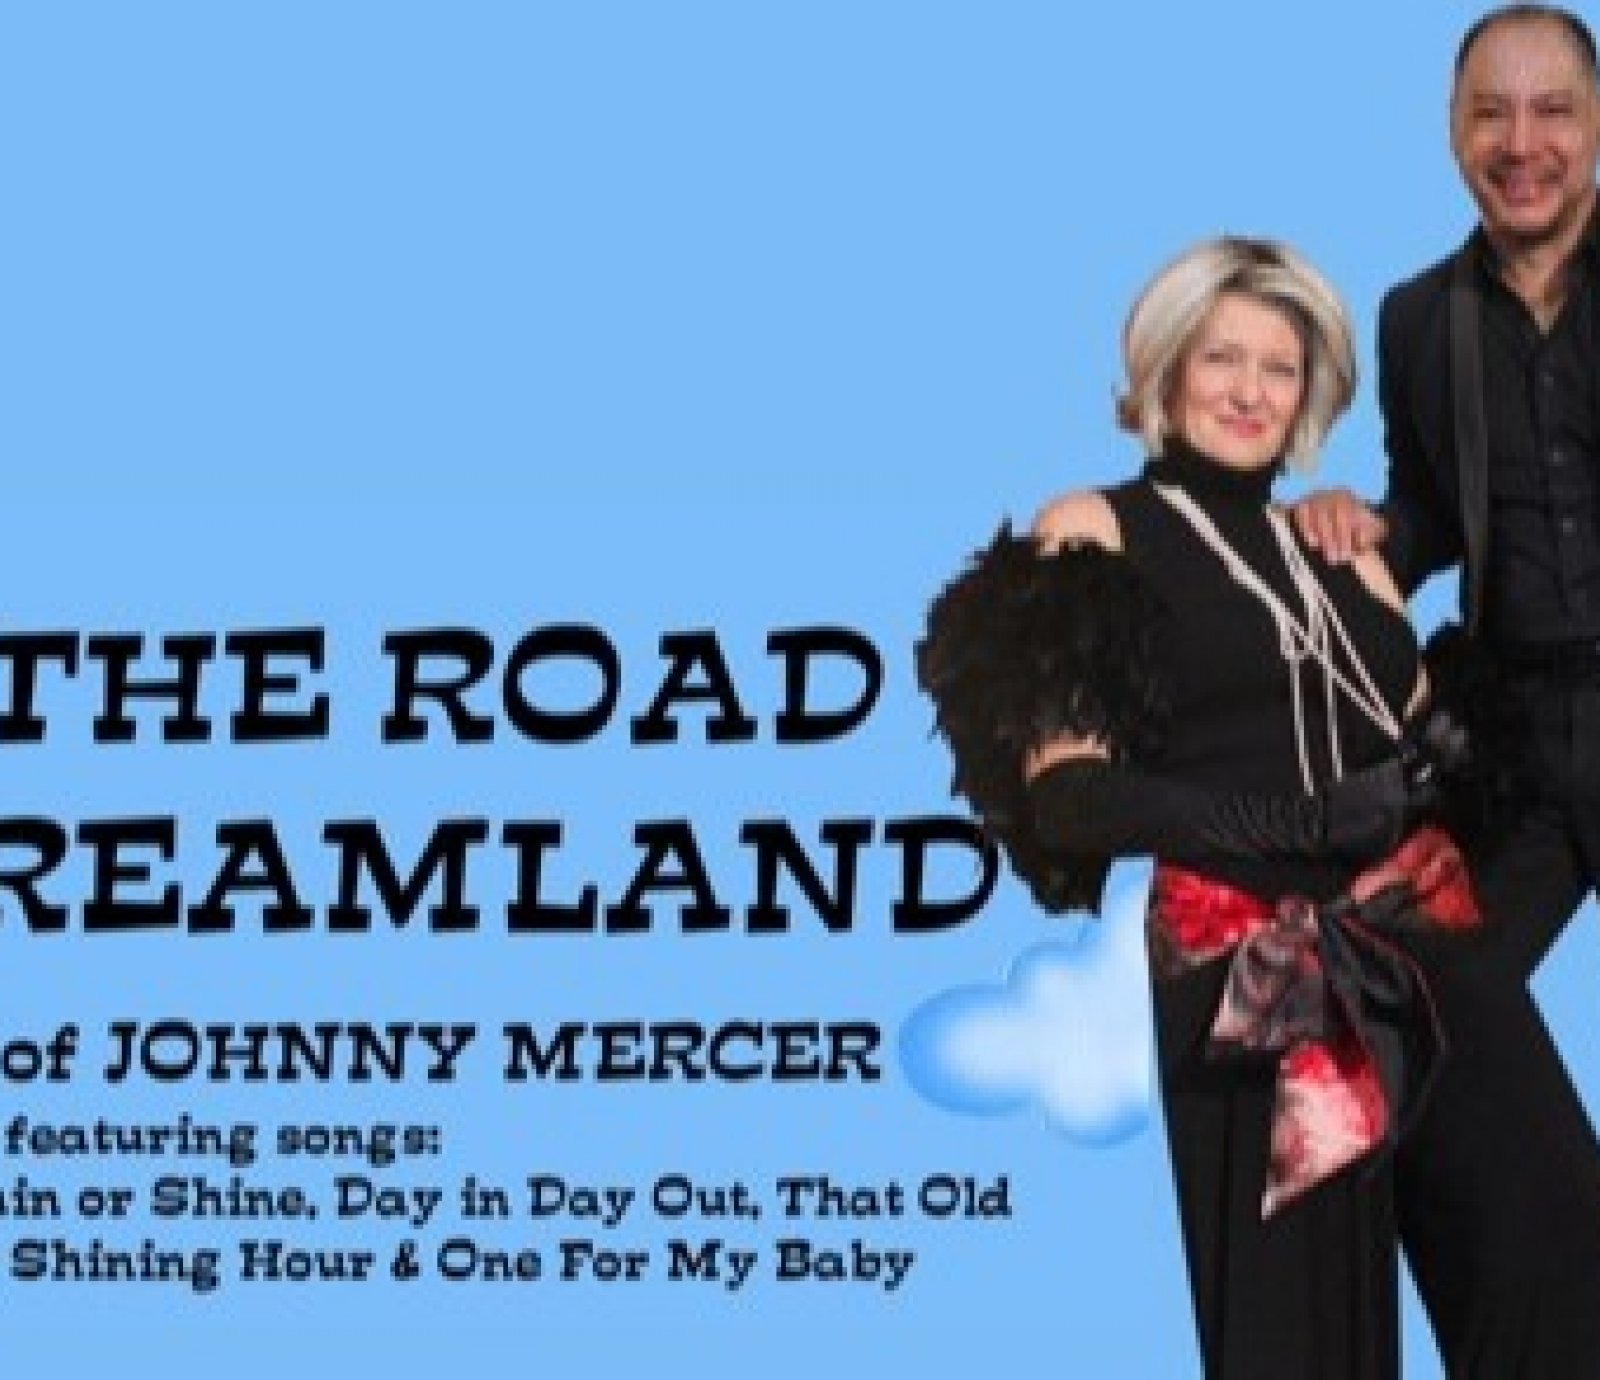 Hit the Road to Dreamland - The magic of Johnny Mercer